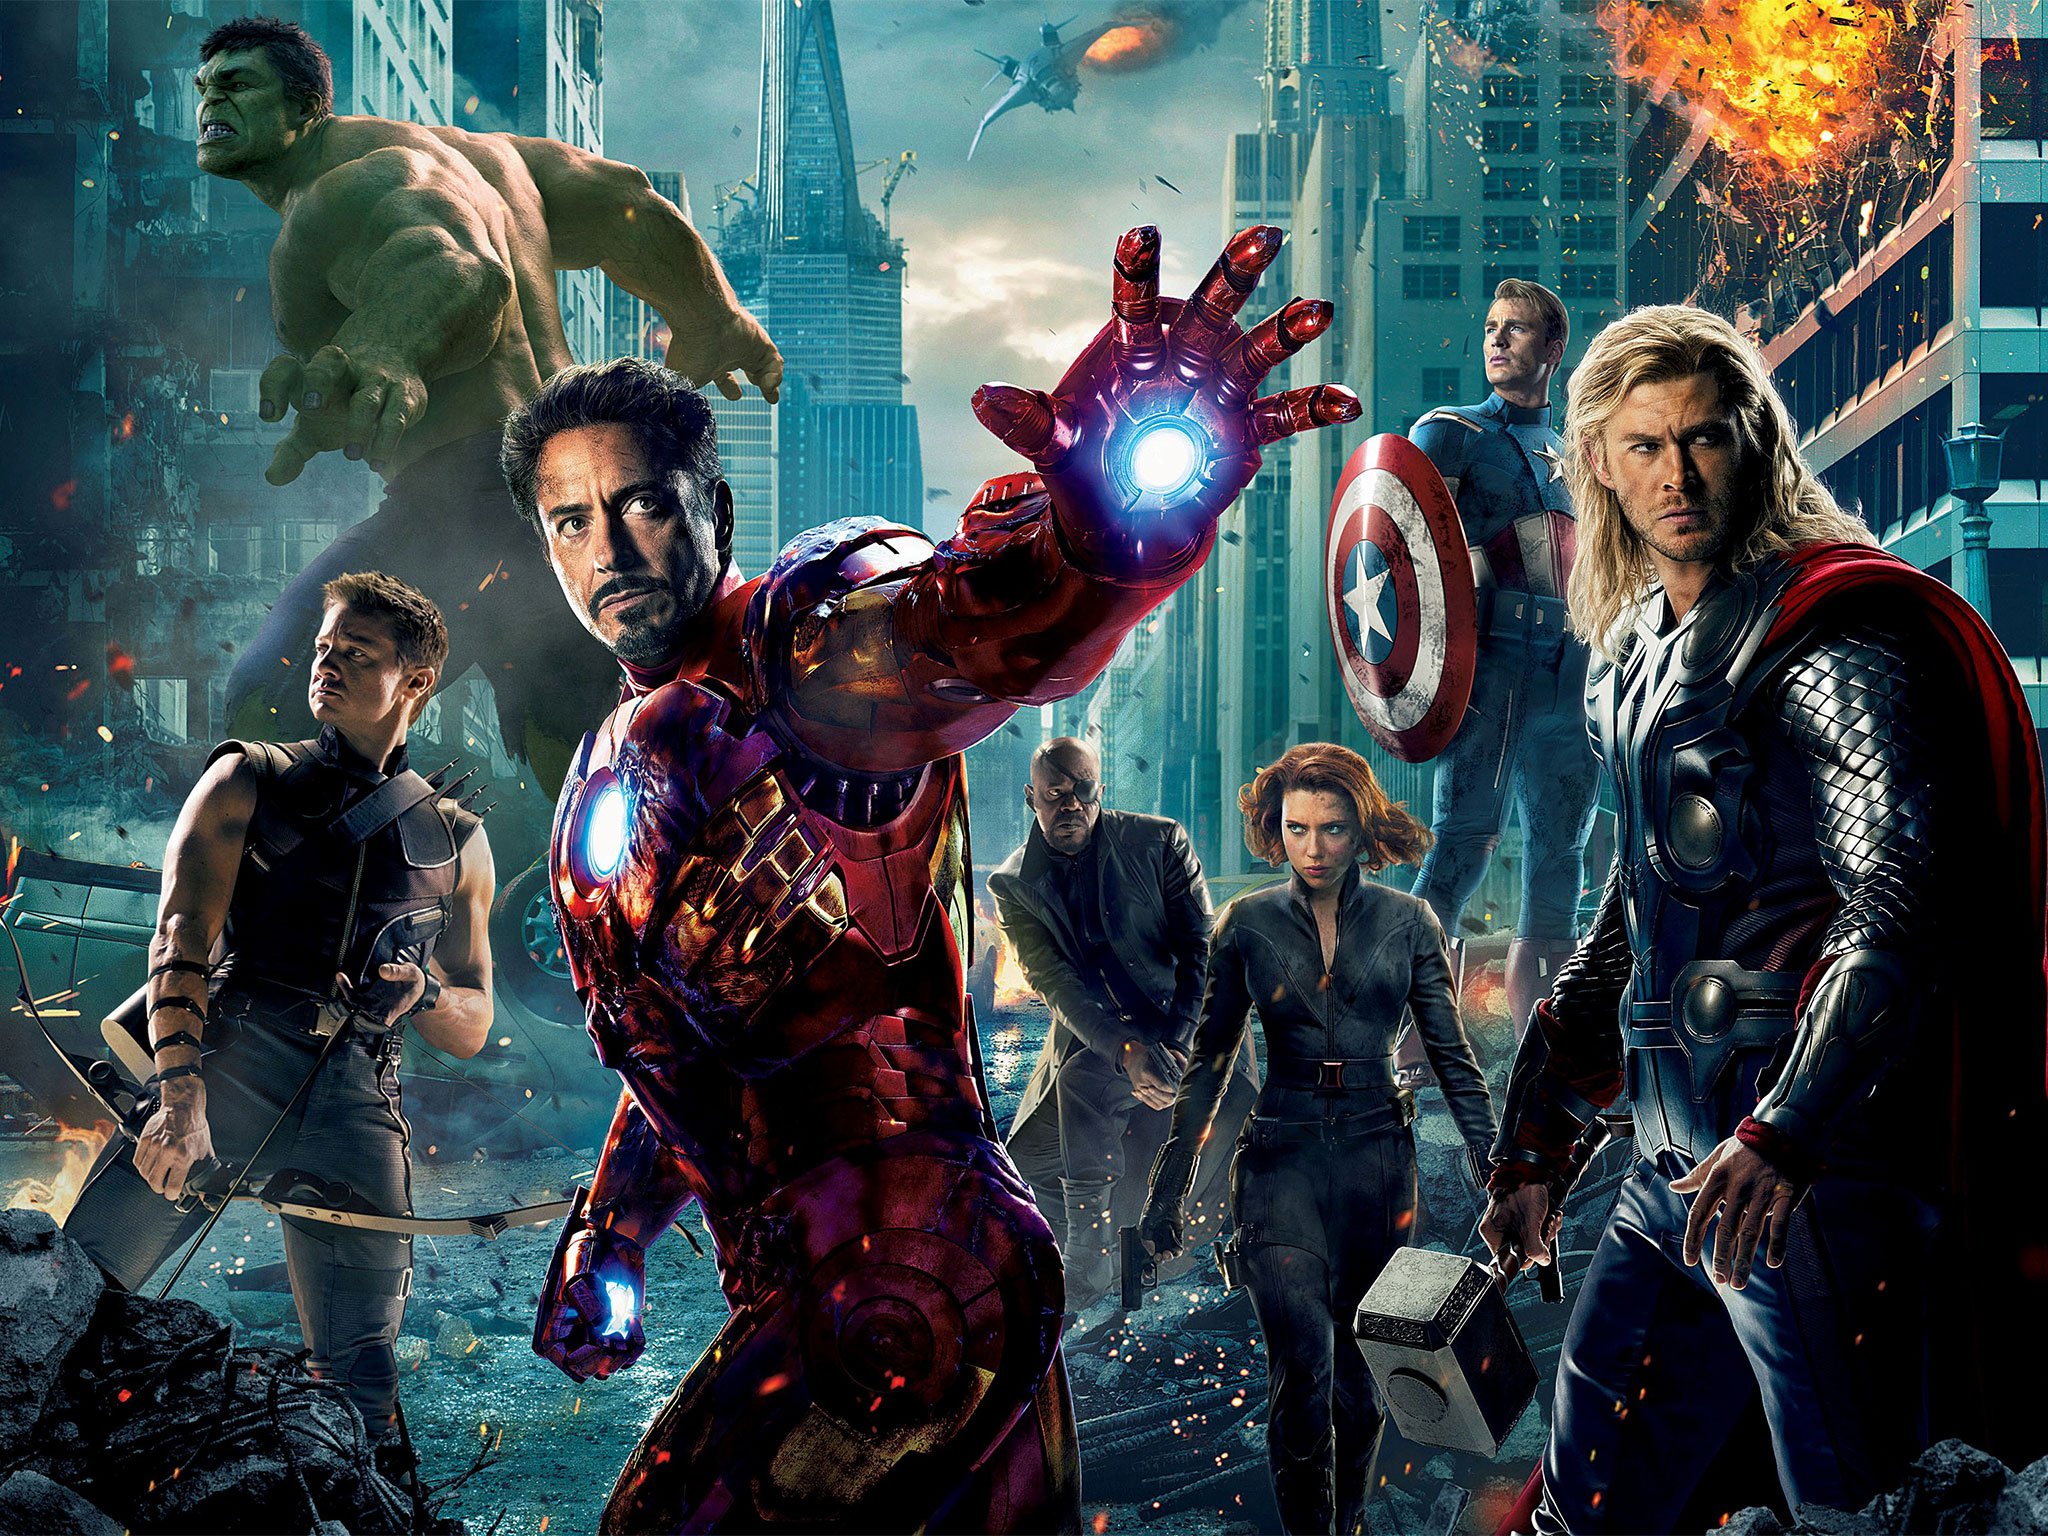 Superman vs. Batman and Avengers: Age of Ultron have been announced, but you can catch up on iTunes right now!